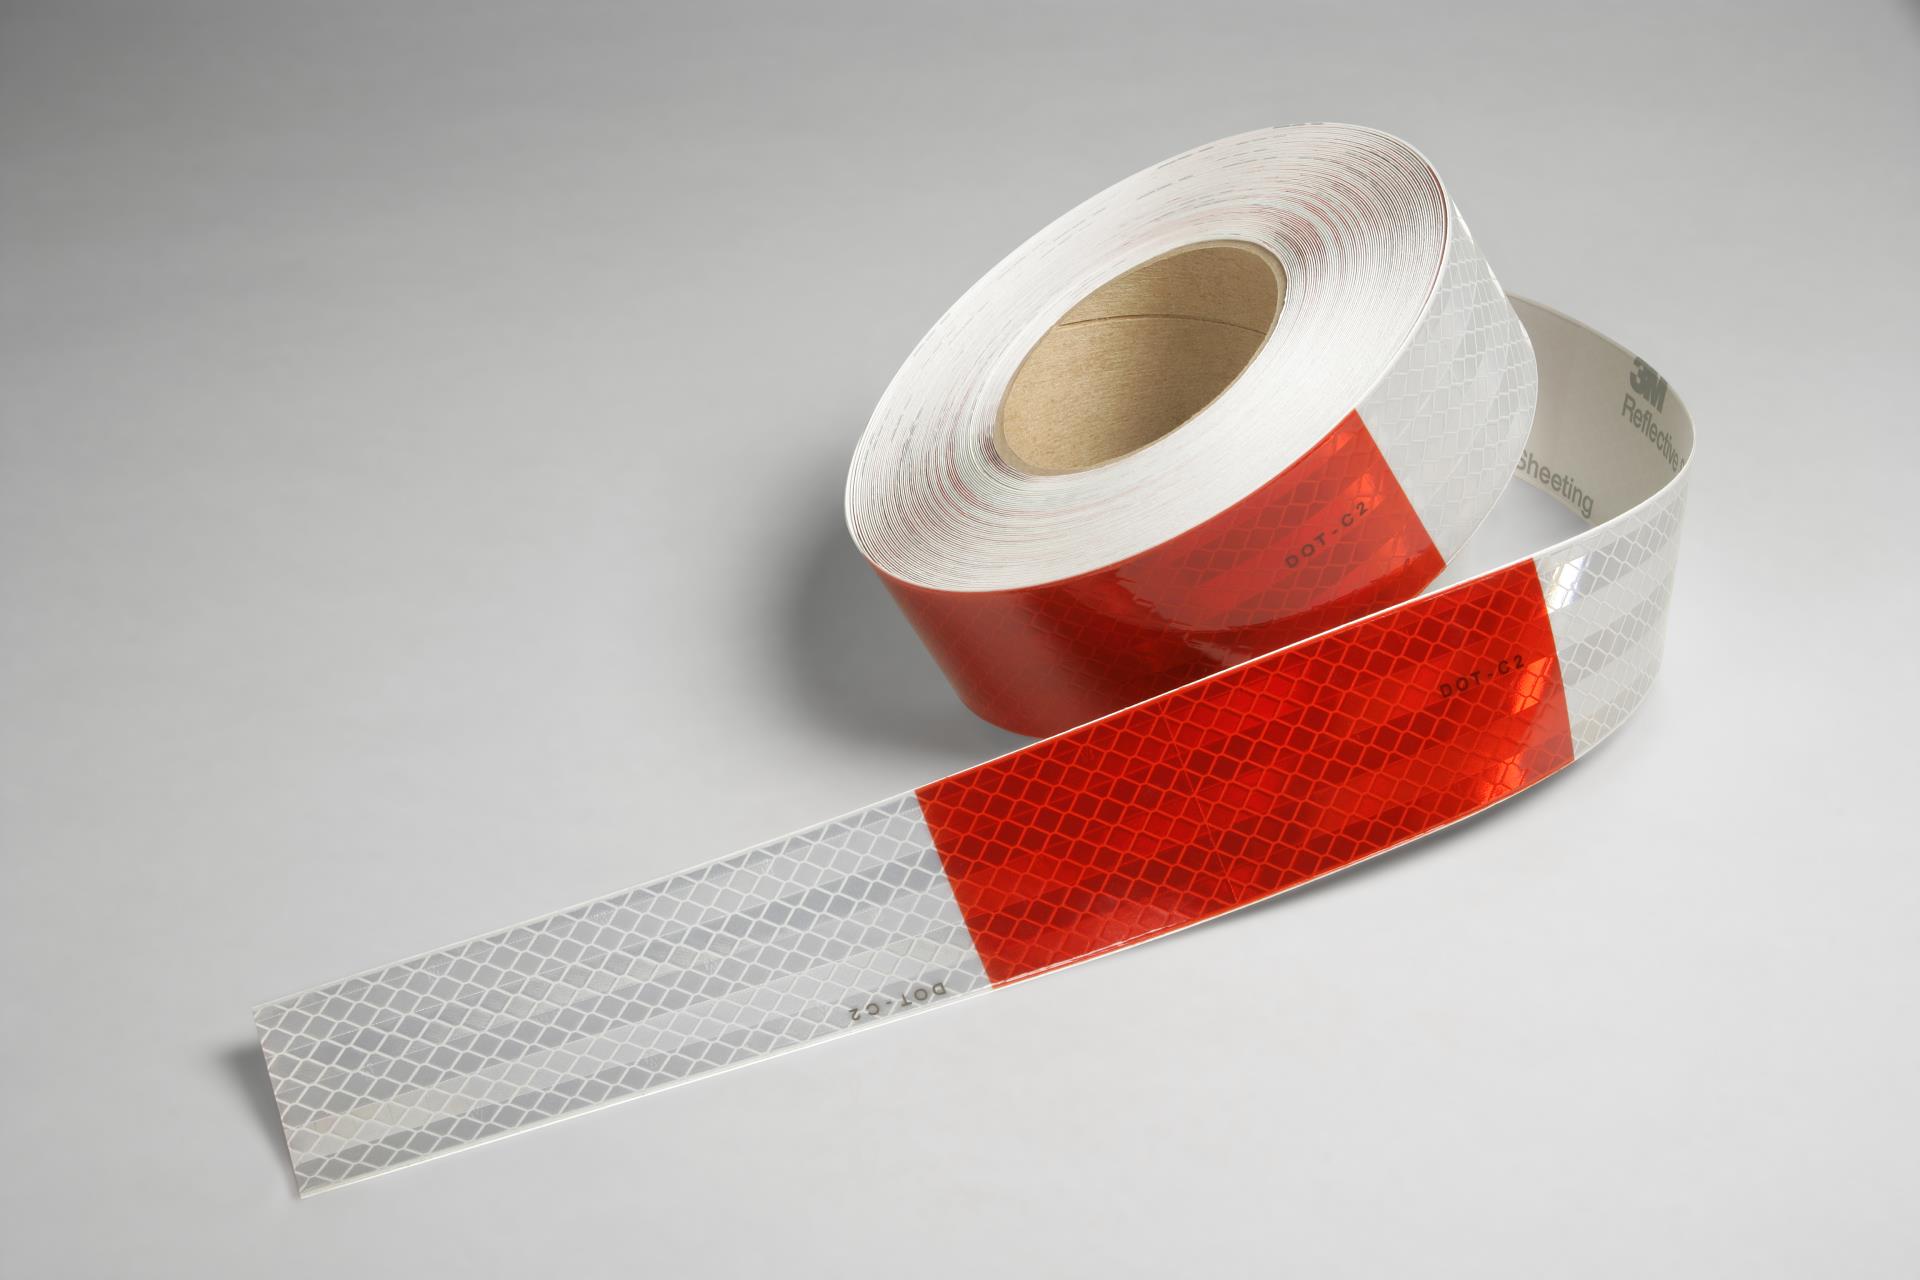 3M 3432 Engineer Grade Prismatic Reflective RED CONSPICUITY TAPE 1/2" x 50 yd 